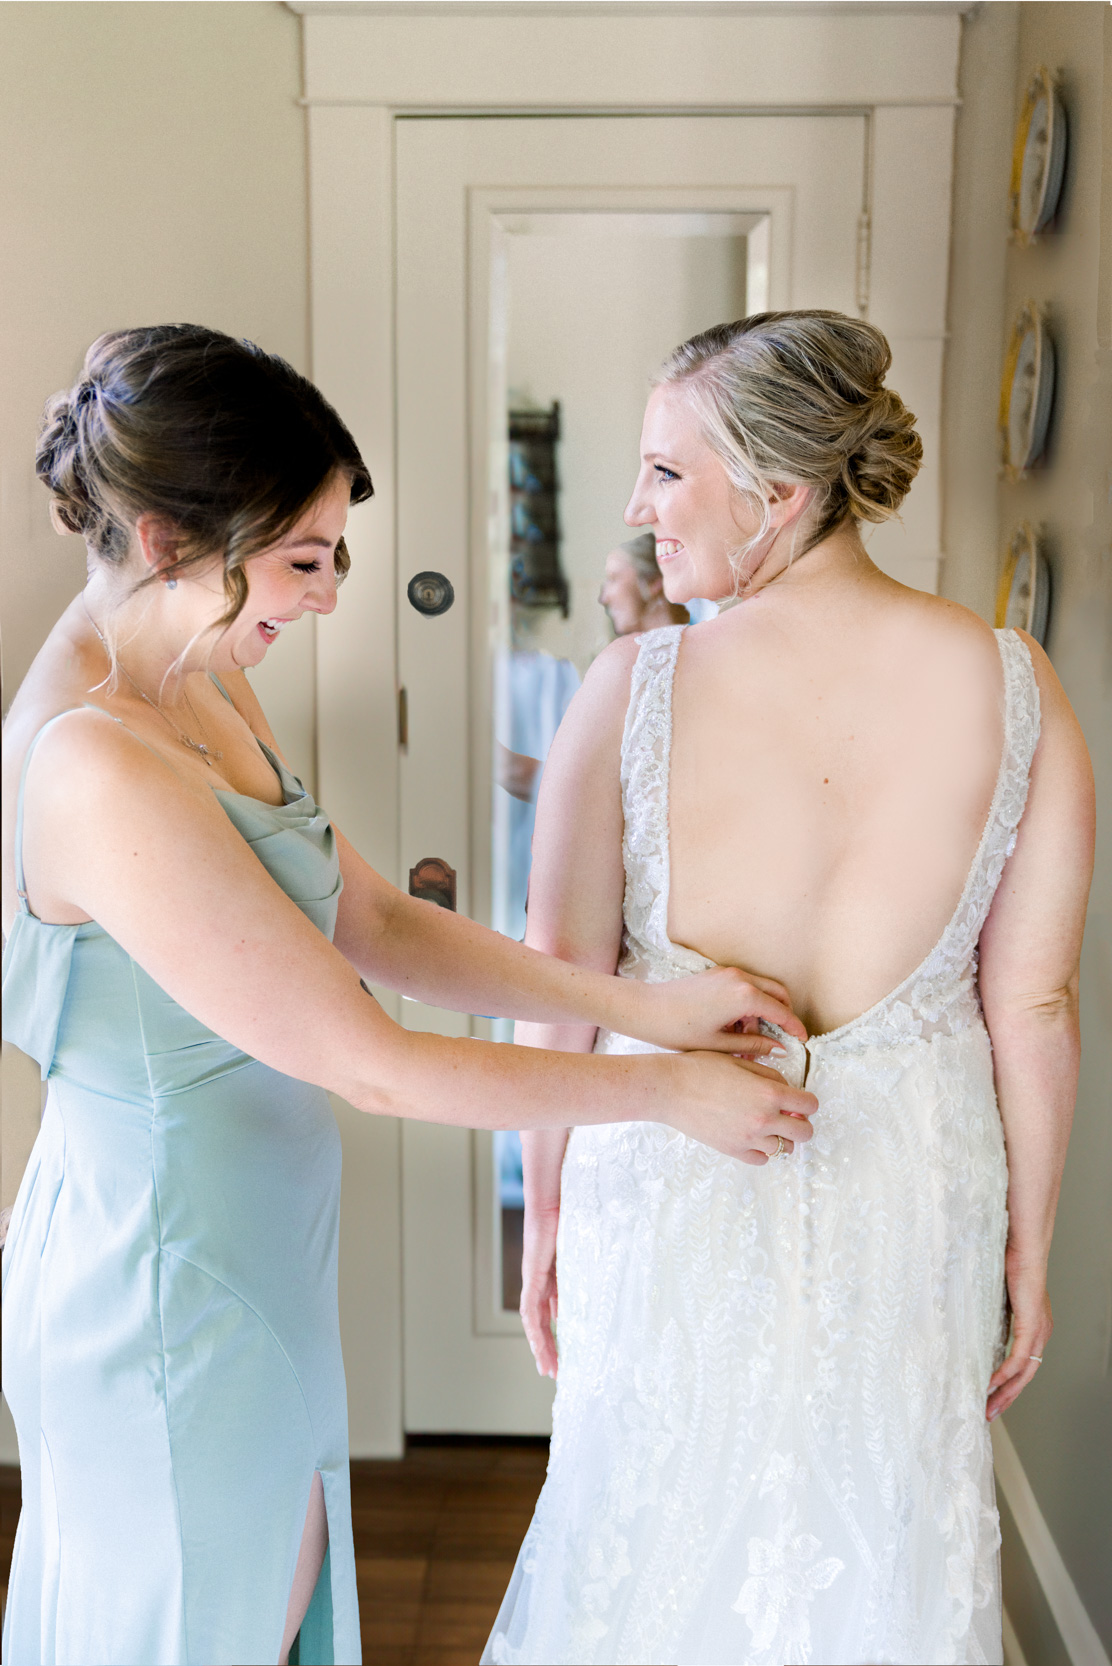 Maid of Honor buttoning bride's dress